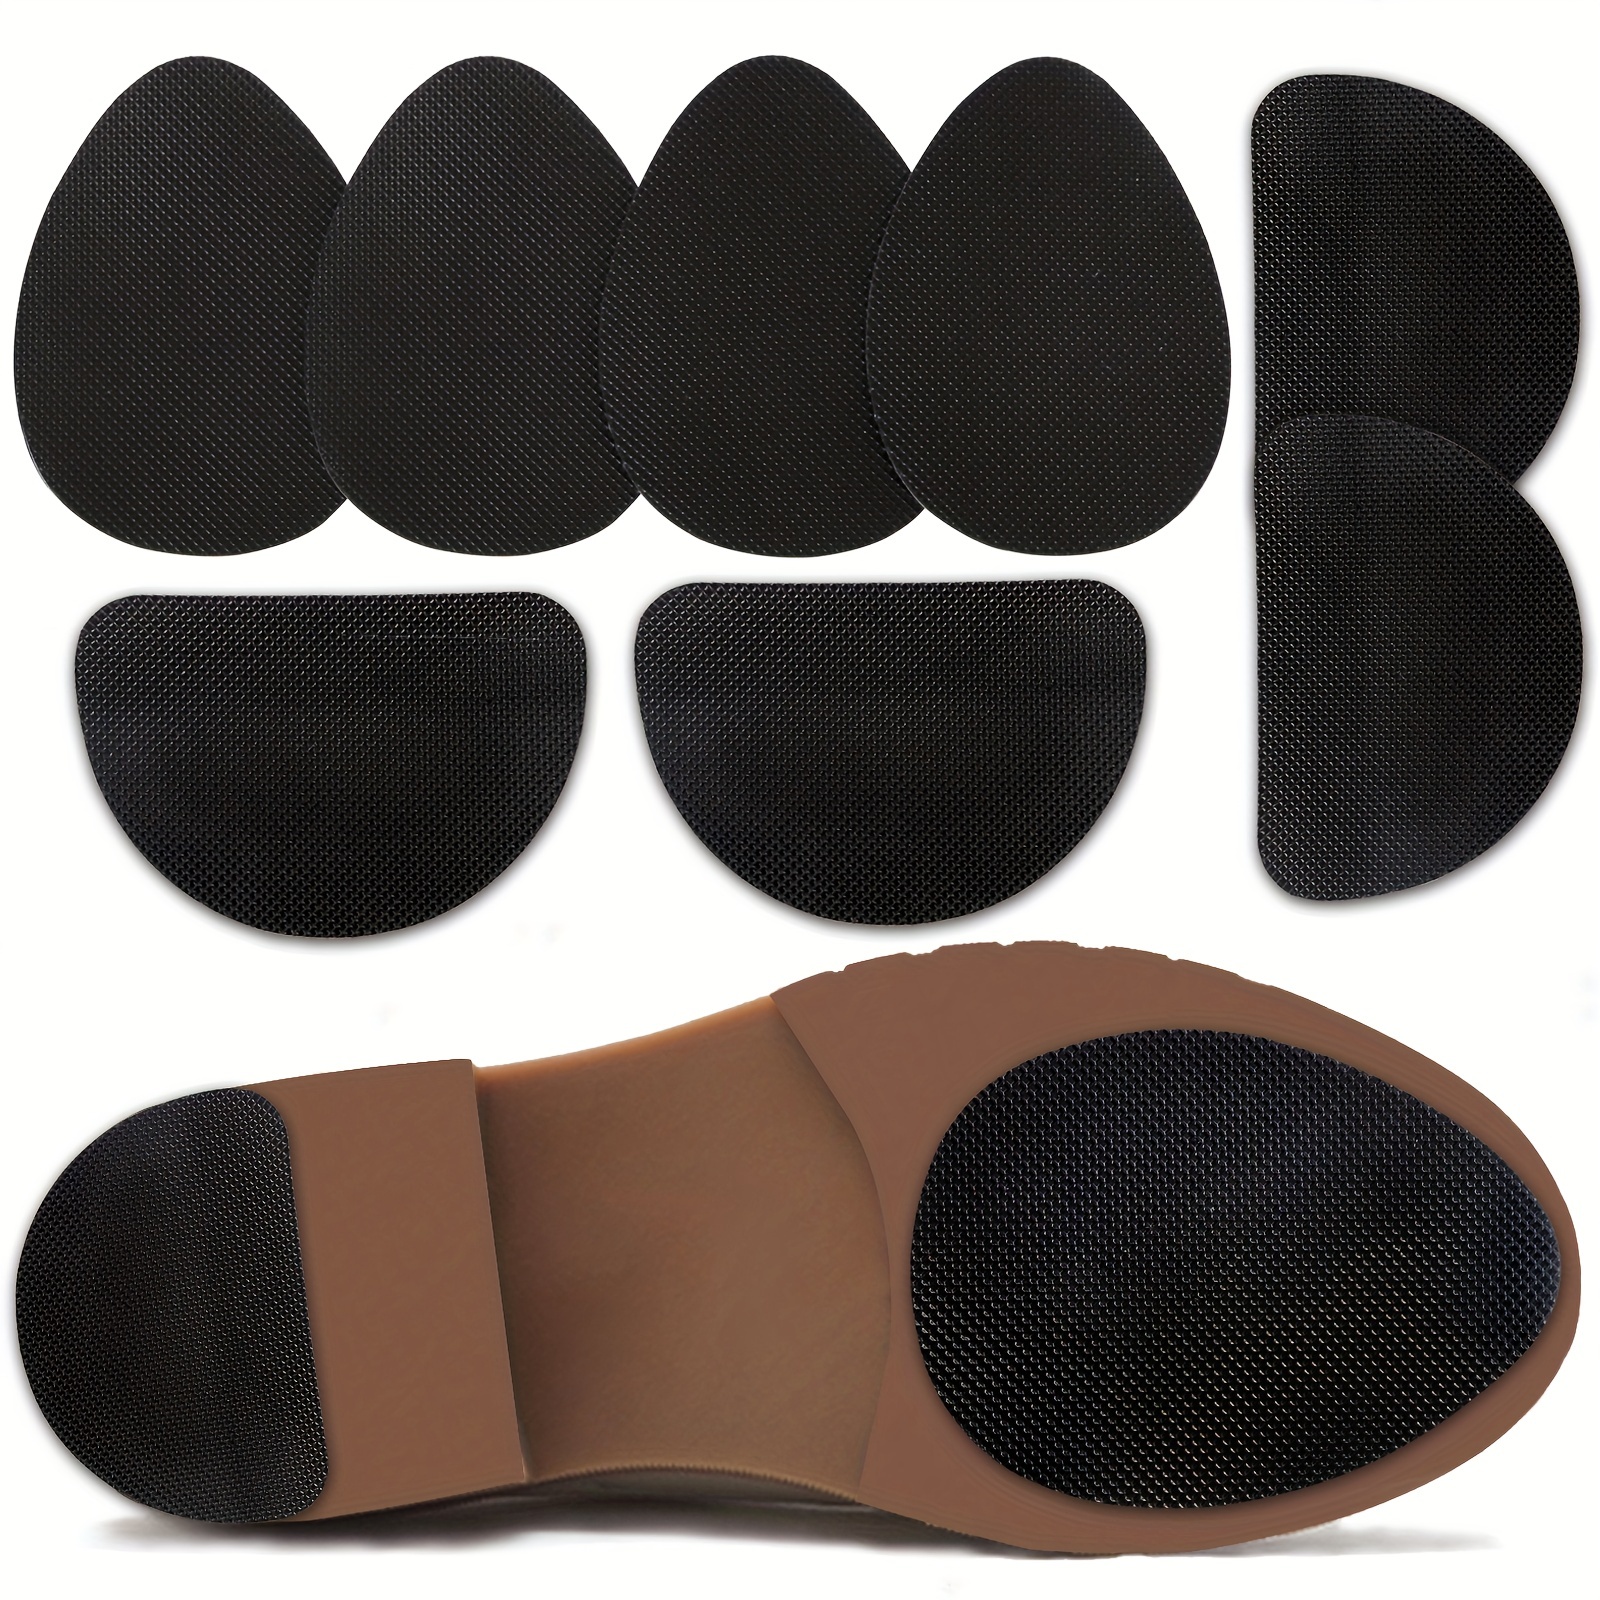 

4 Pairs Of Non-slip Shoe Pads - Protect Your High Heels & Soles With Adhesive Grips!